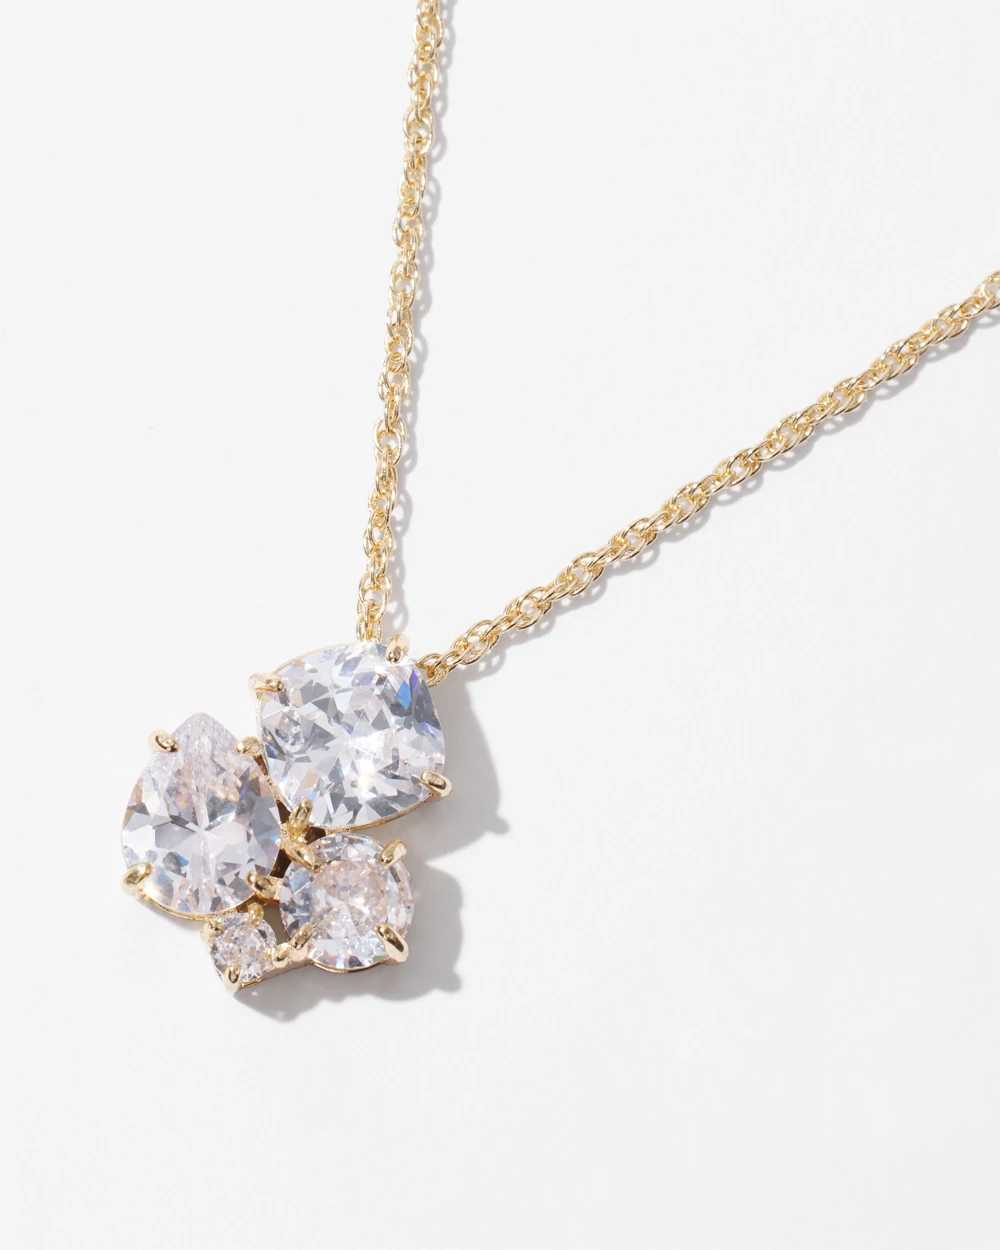 Gold + Crystal Cluster Pendant Necklace click to view larger image.